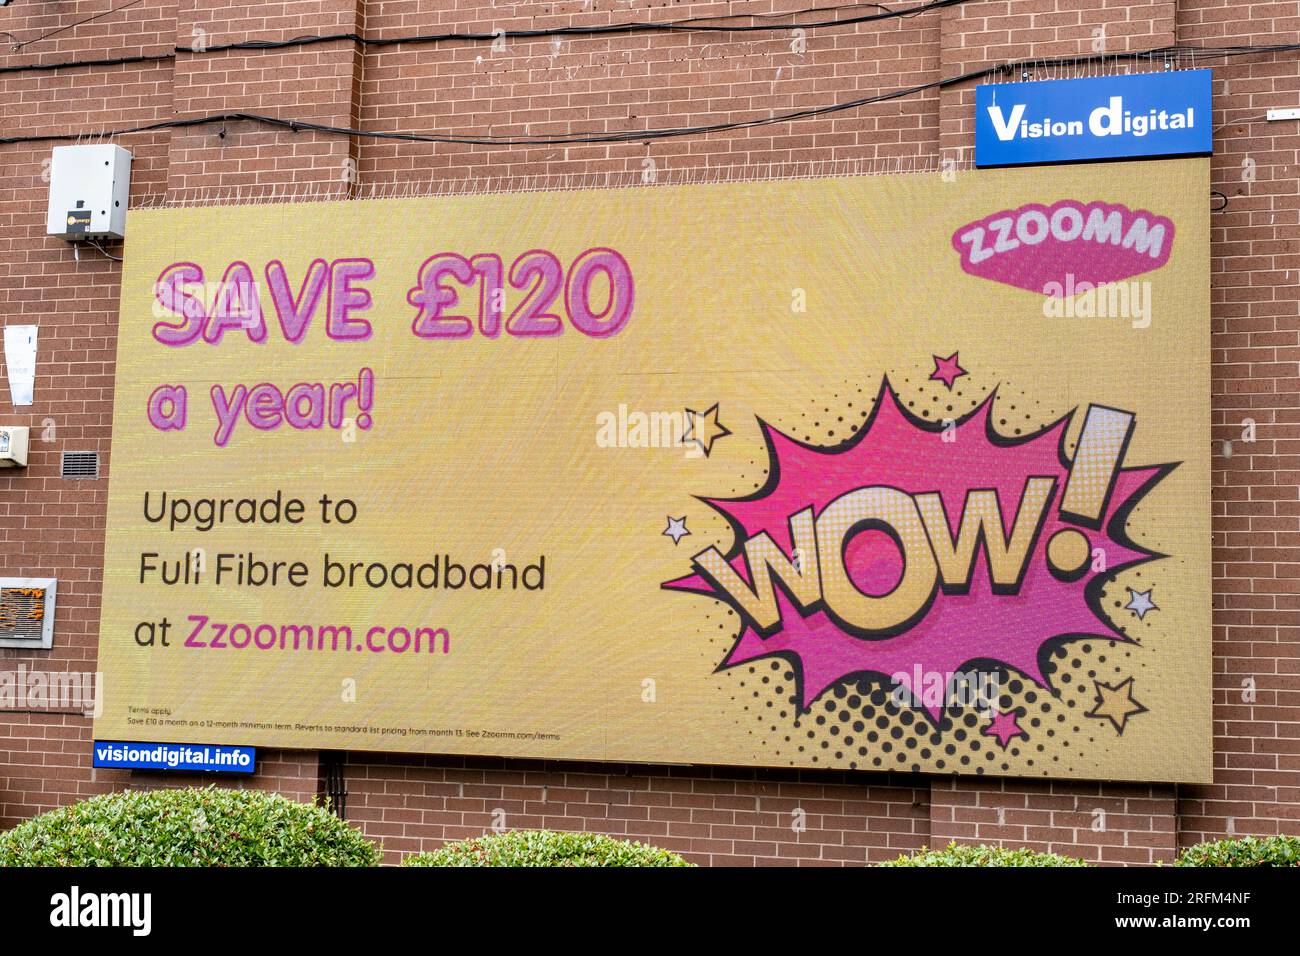 Zzoomm LED billboard promoting full fibre broadband on outside wall in Crewe Cheshire UK Stock Photo